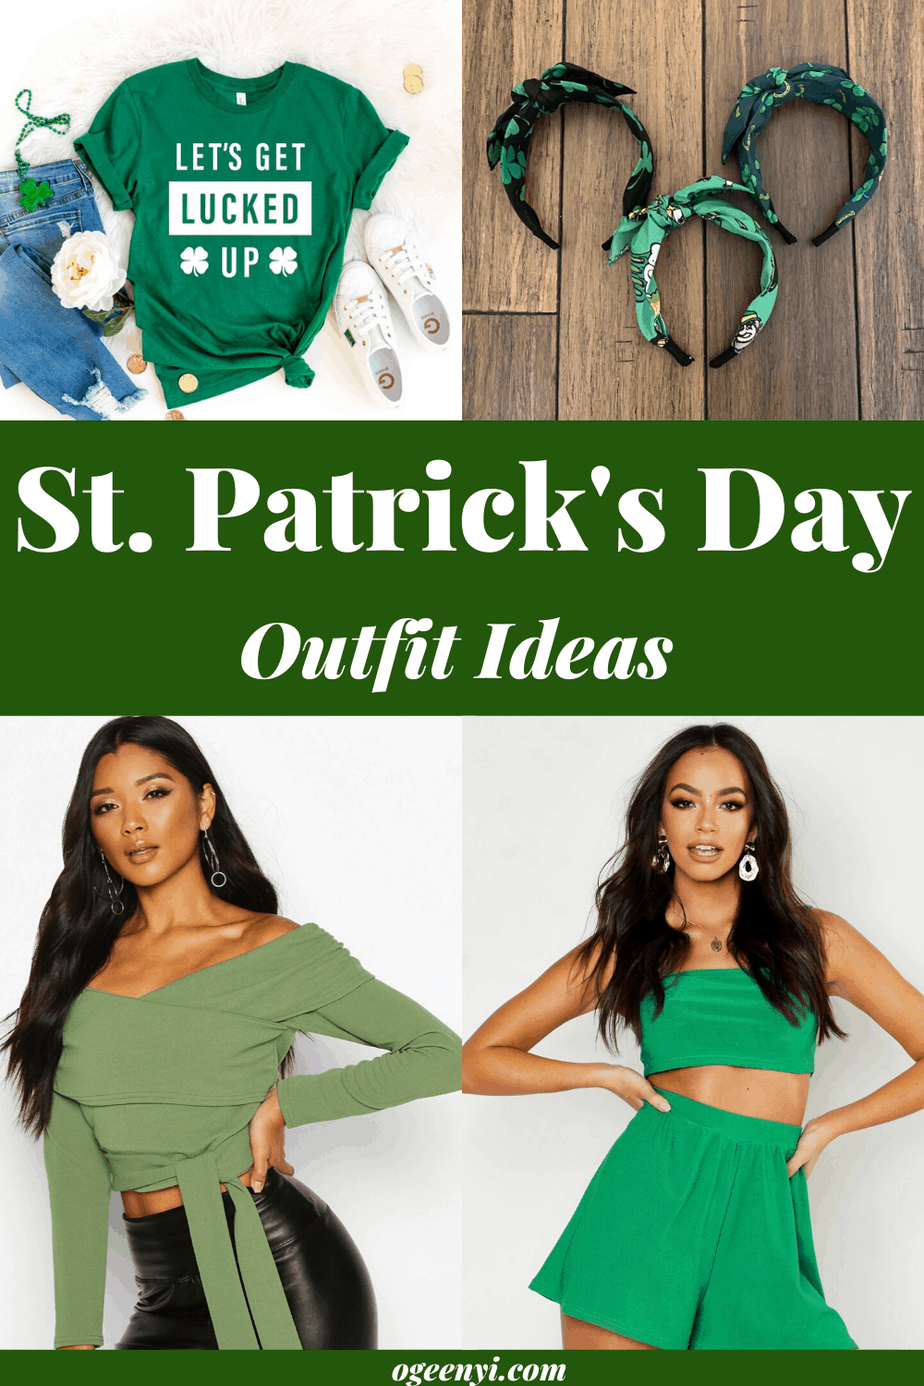 St.Patrick's Day Outfit Ideas: How To Look Fabulous In Green